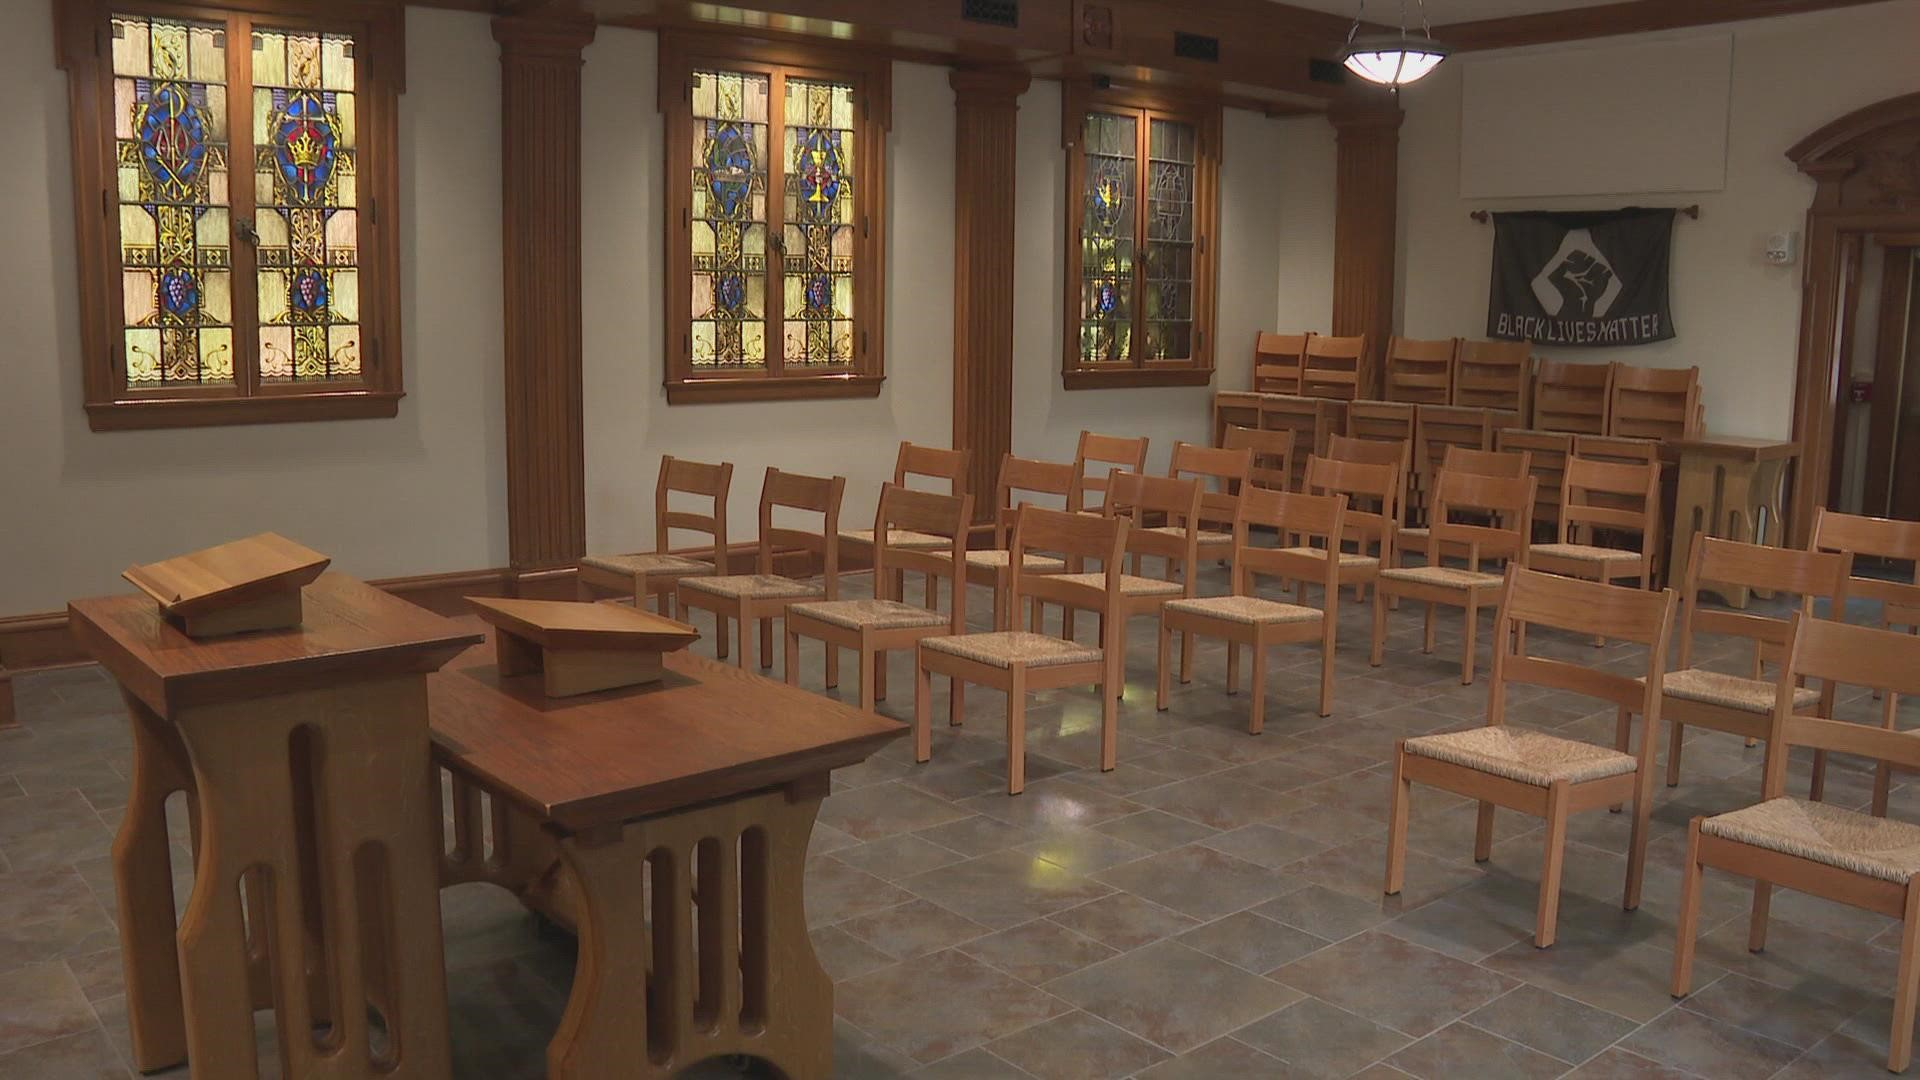 The church first opened 66 years ago. It cited multiple reasons for the upcoming closure.